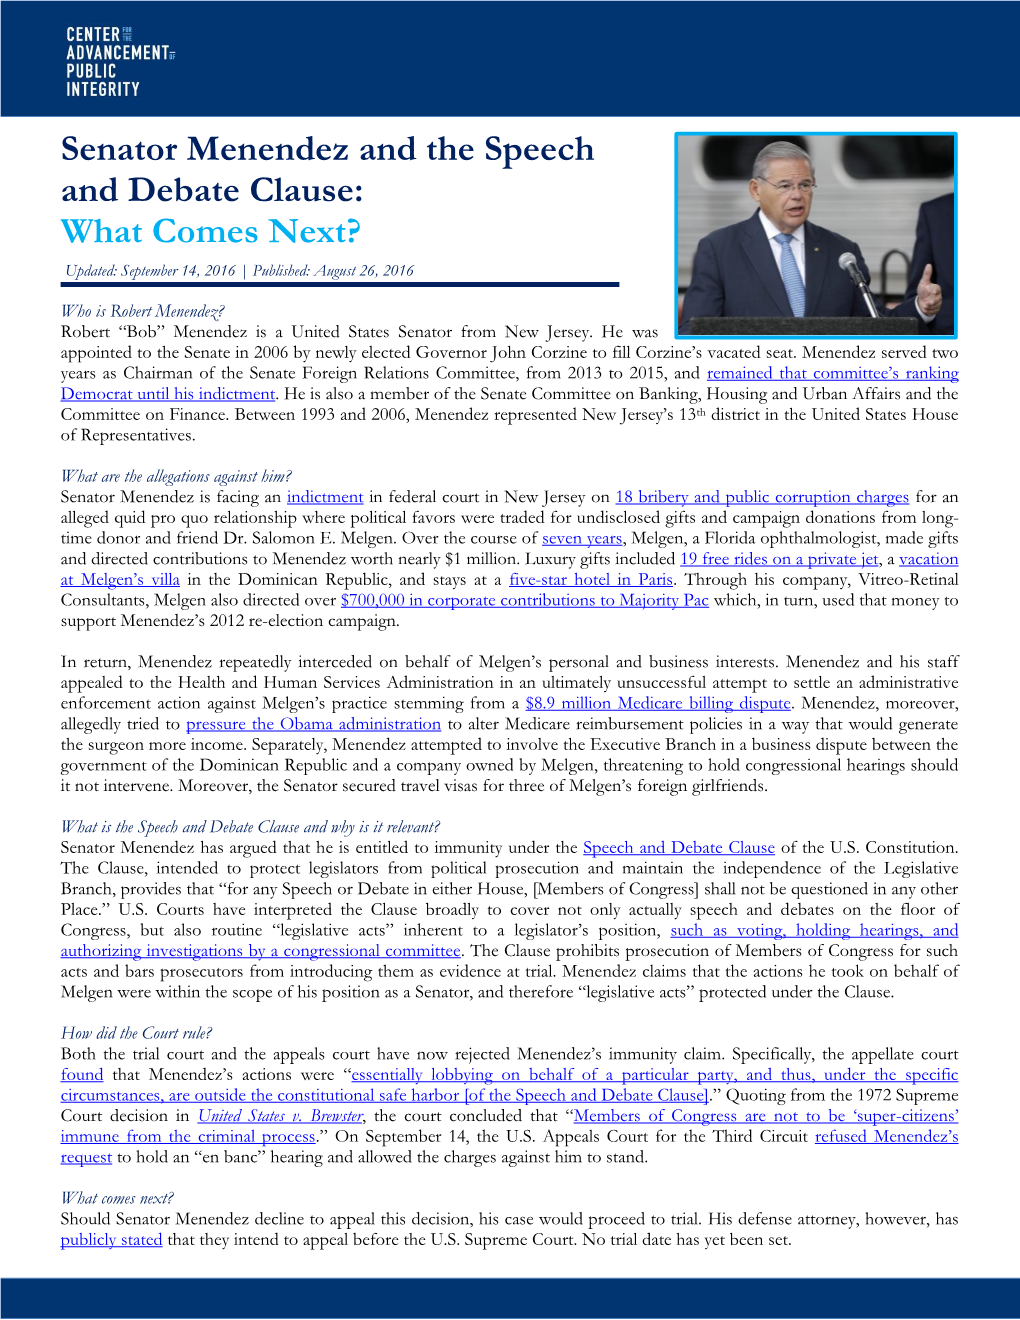 Senator Menendez and the Speech and Debate Clause: What Comes Next?